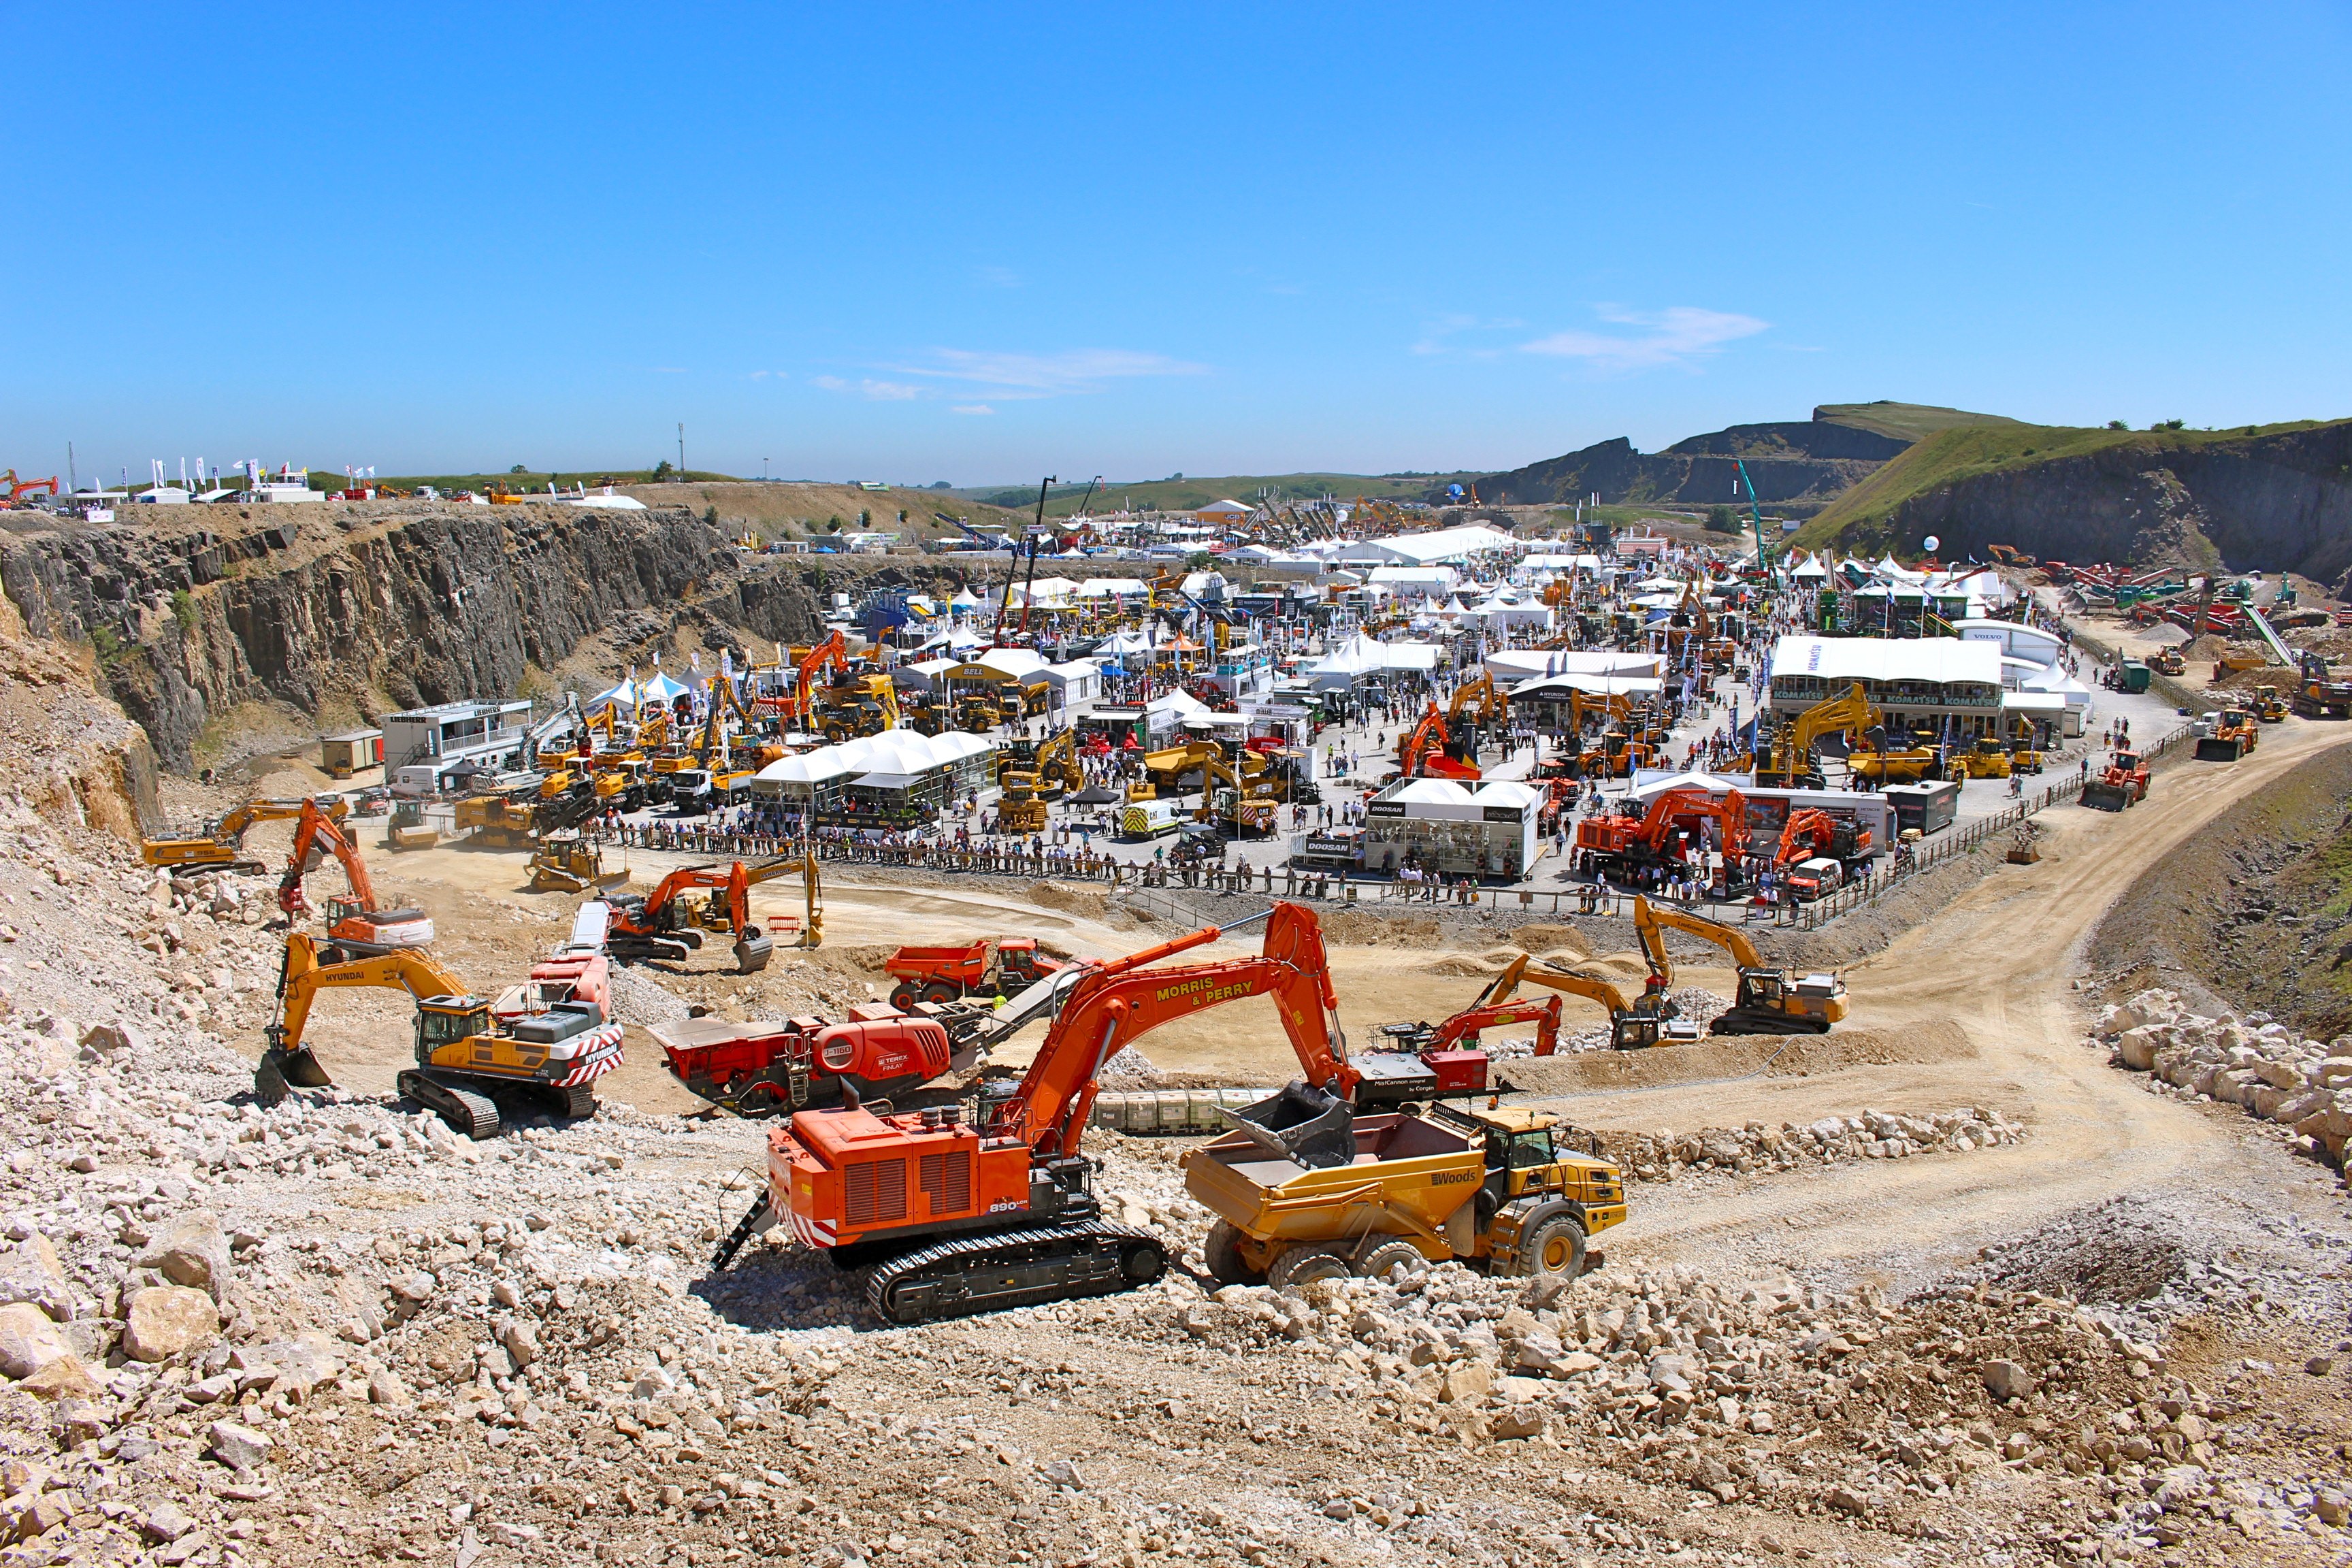 With an unprecedented 546 exhibitors and almost 20,000 trade visitors in attendance, Hillhead 2018 was the biggest and most successful show to date